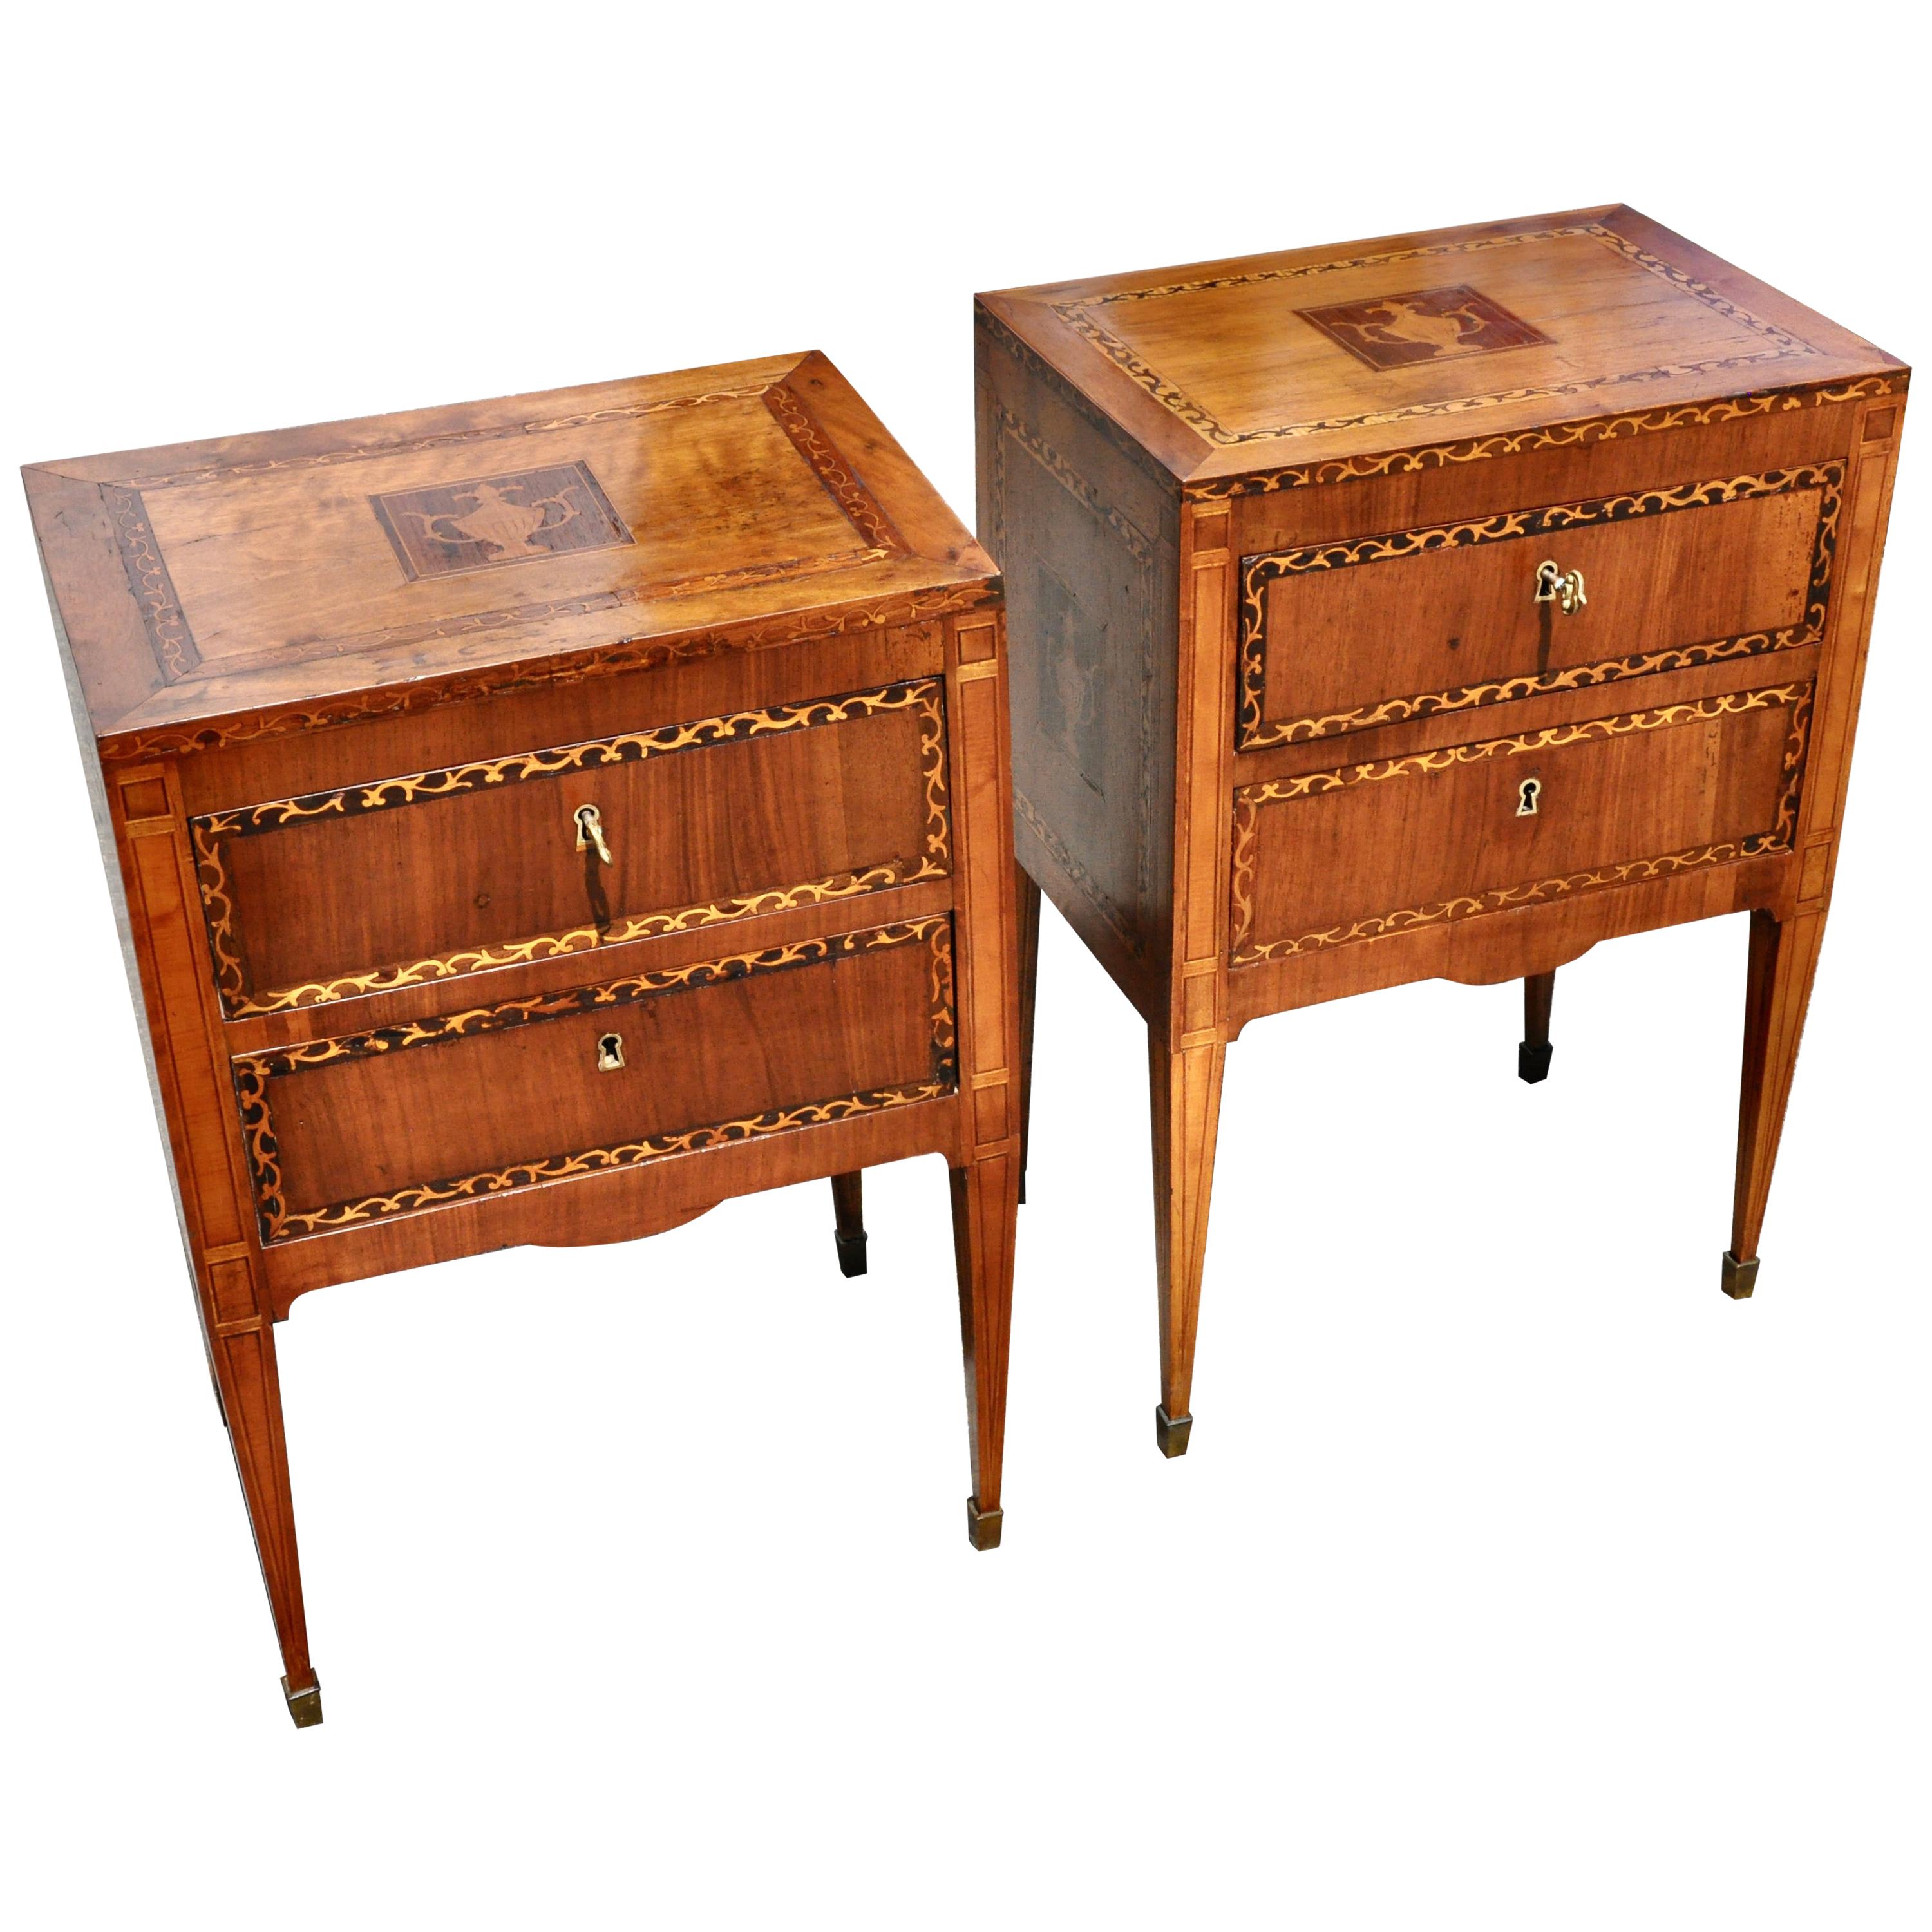 Pair of 18th Century Italian Neoclassical Small Commodes in Fruitwood